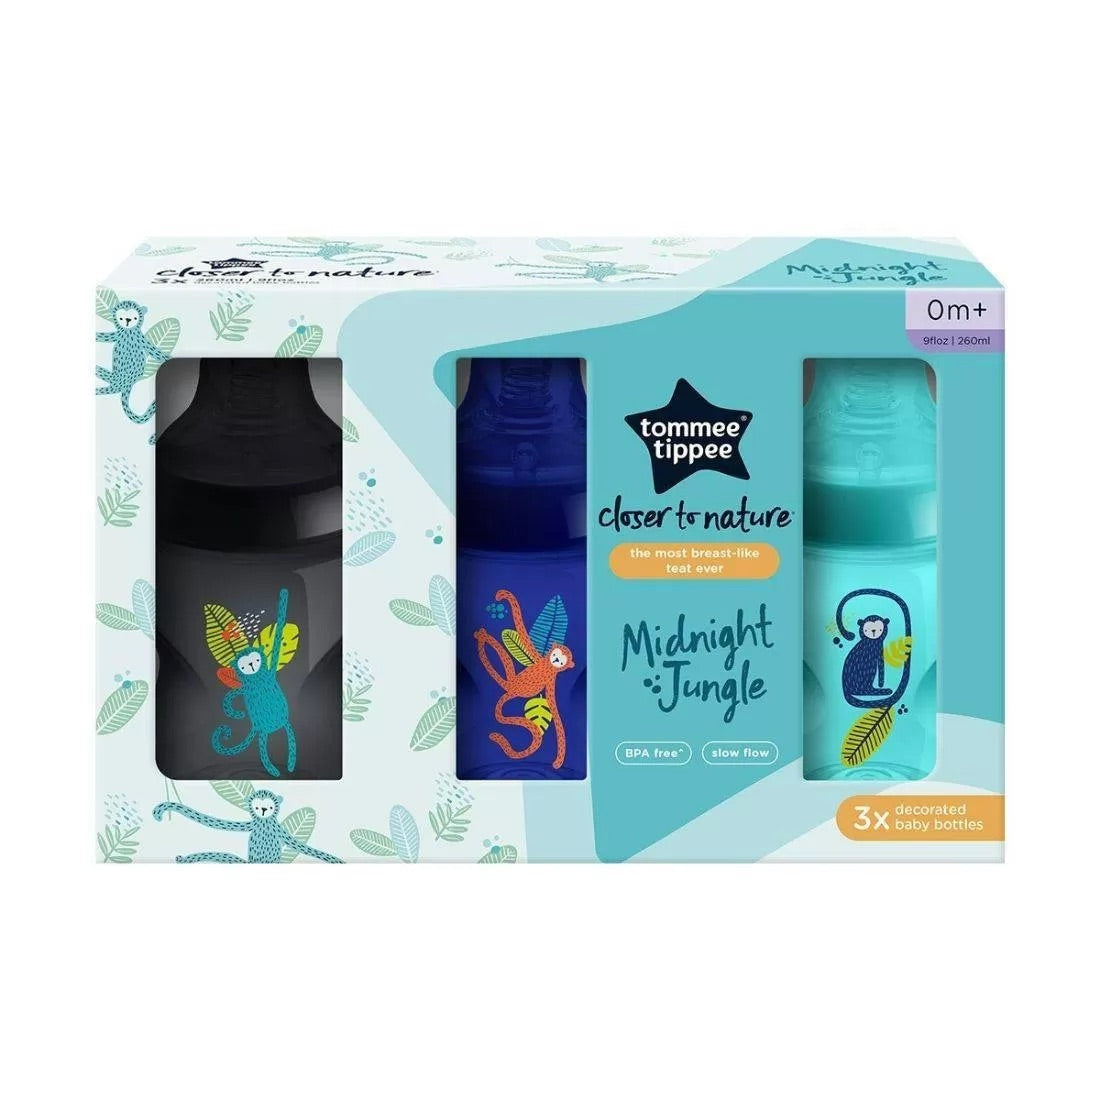 Tommee Tippee Closer to Nature Bottles Midnight Jungle Kit | Blue (0m+) Pack of 3